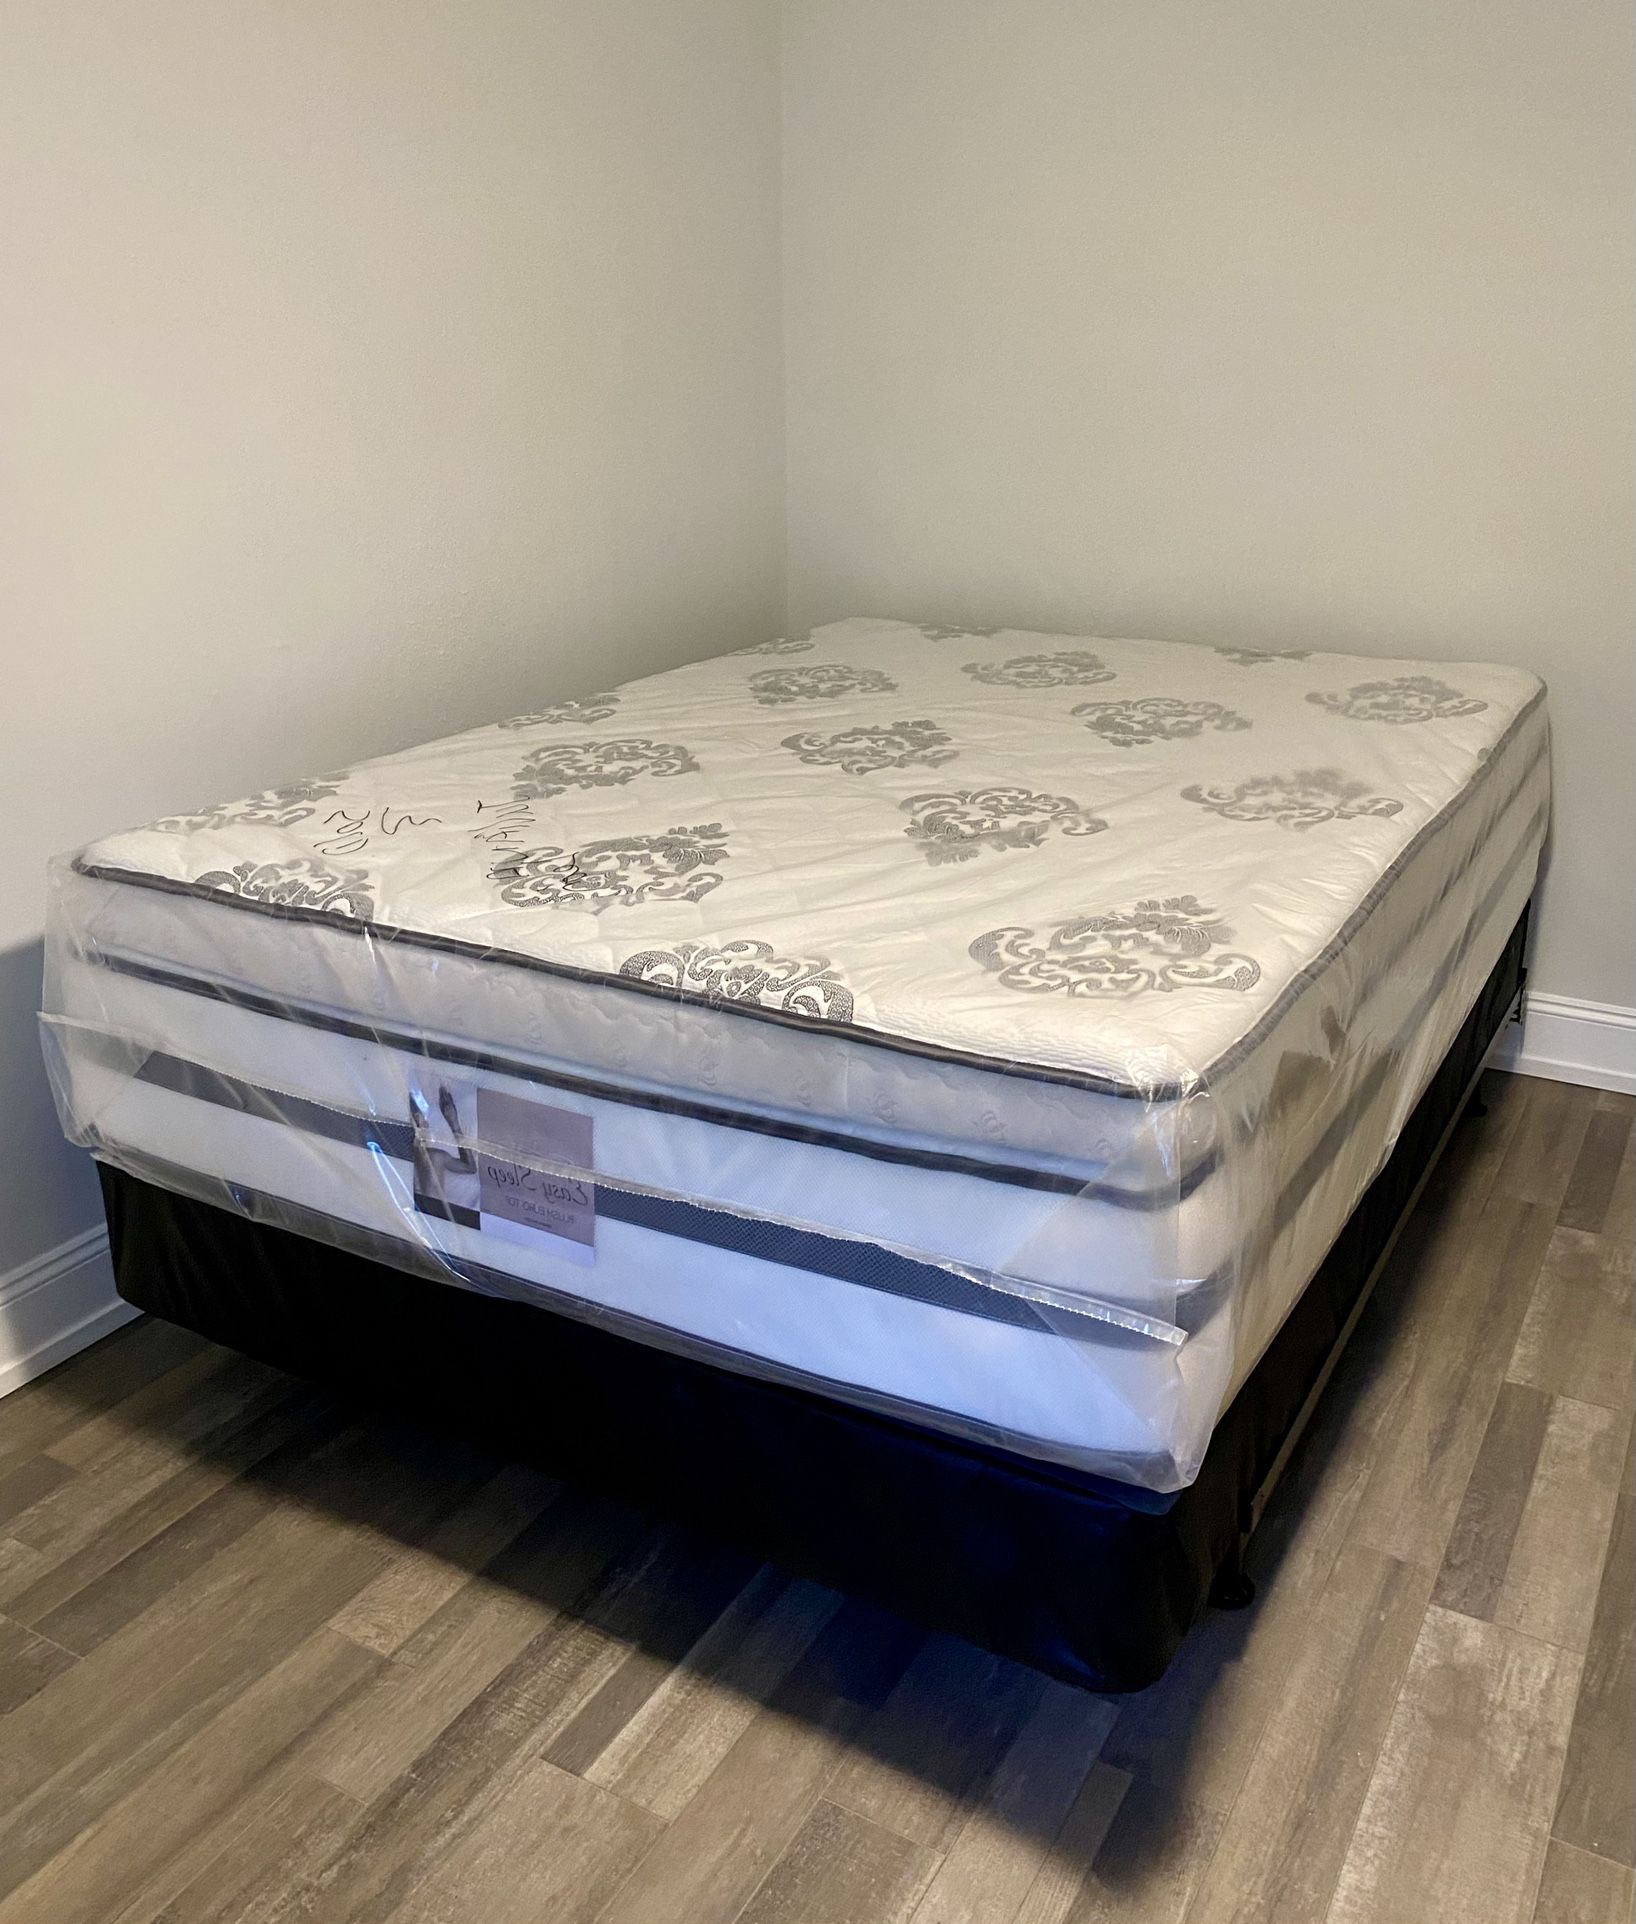 Full Size Mattress 14 Inch Thick With Pillow Top Of Gran Comfort And Box Springs New From Factory Available All Sizes Same Day Delivery